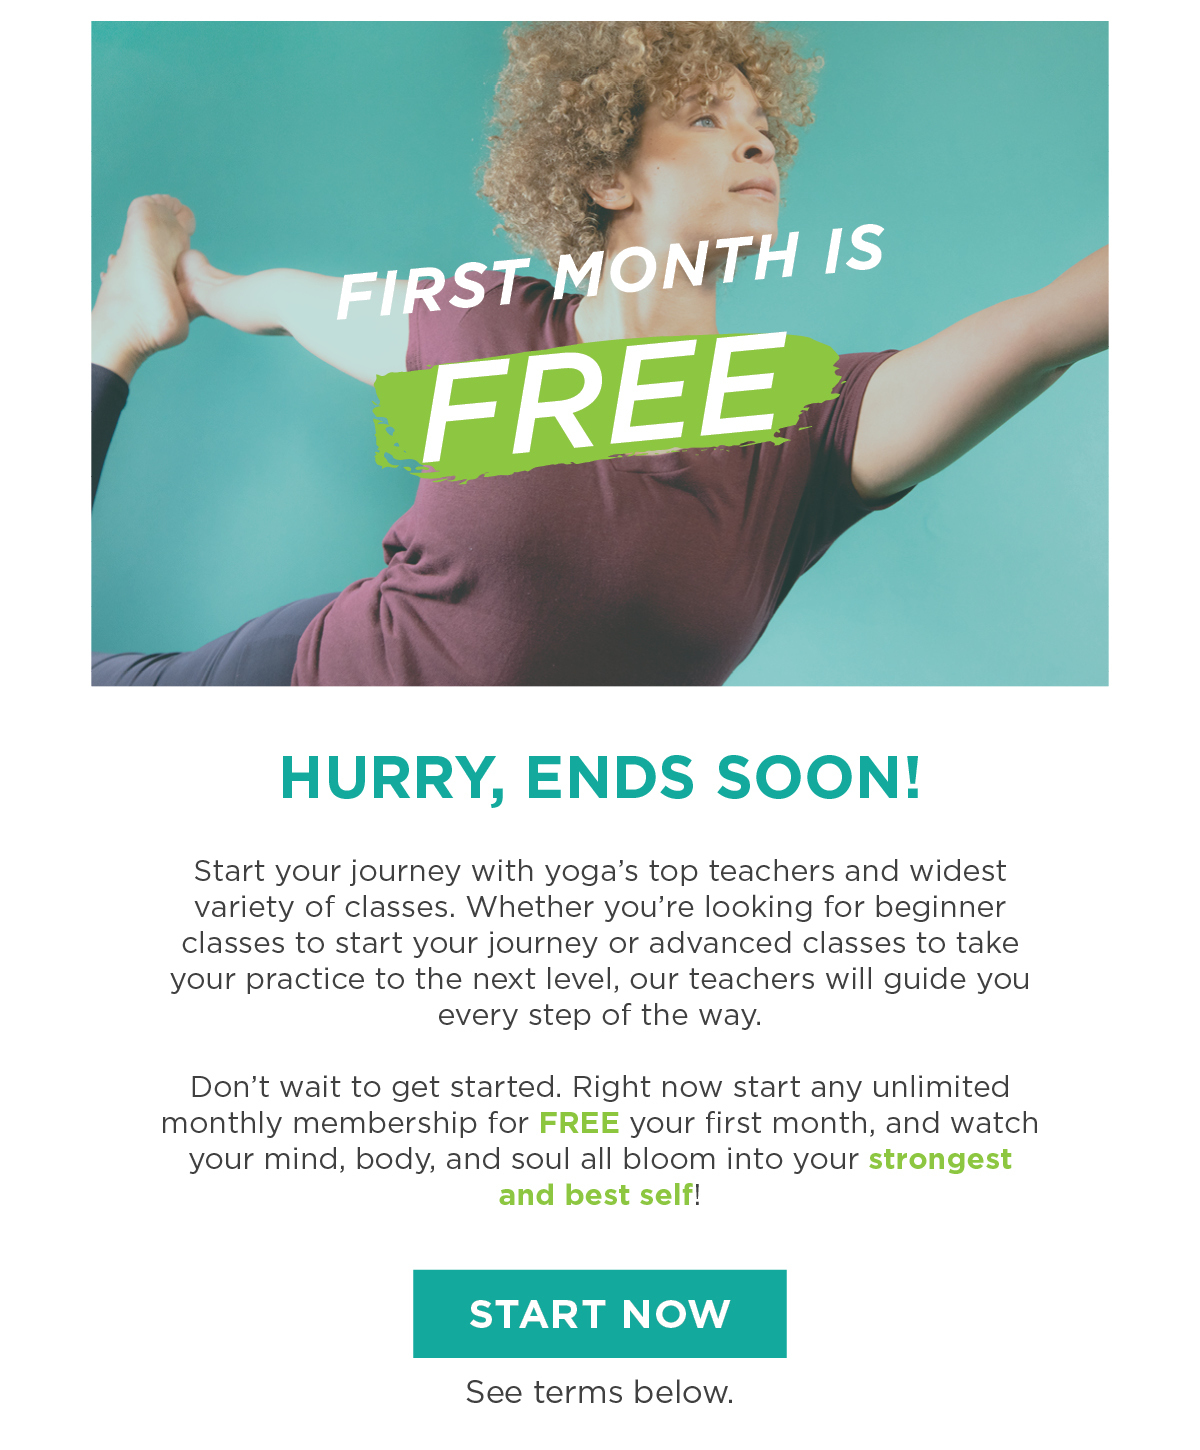 Your first month is free!